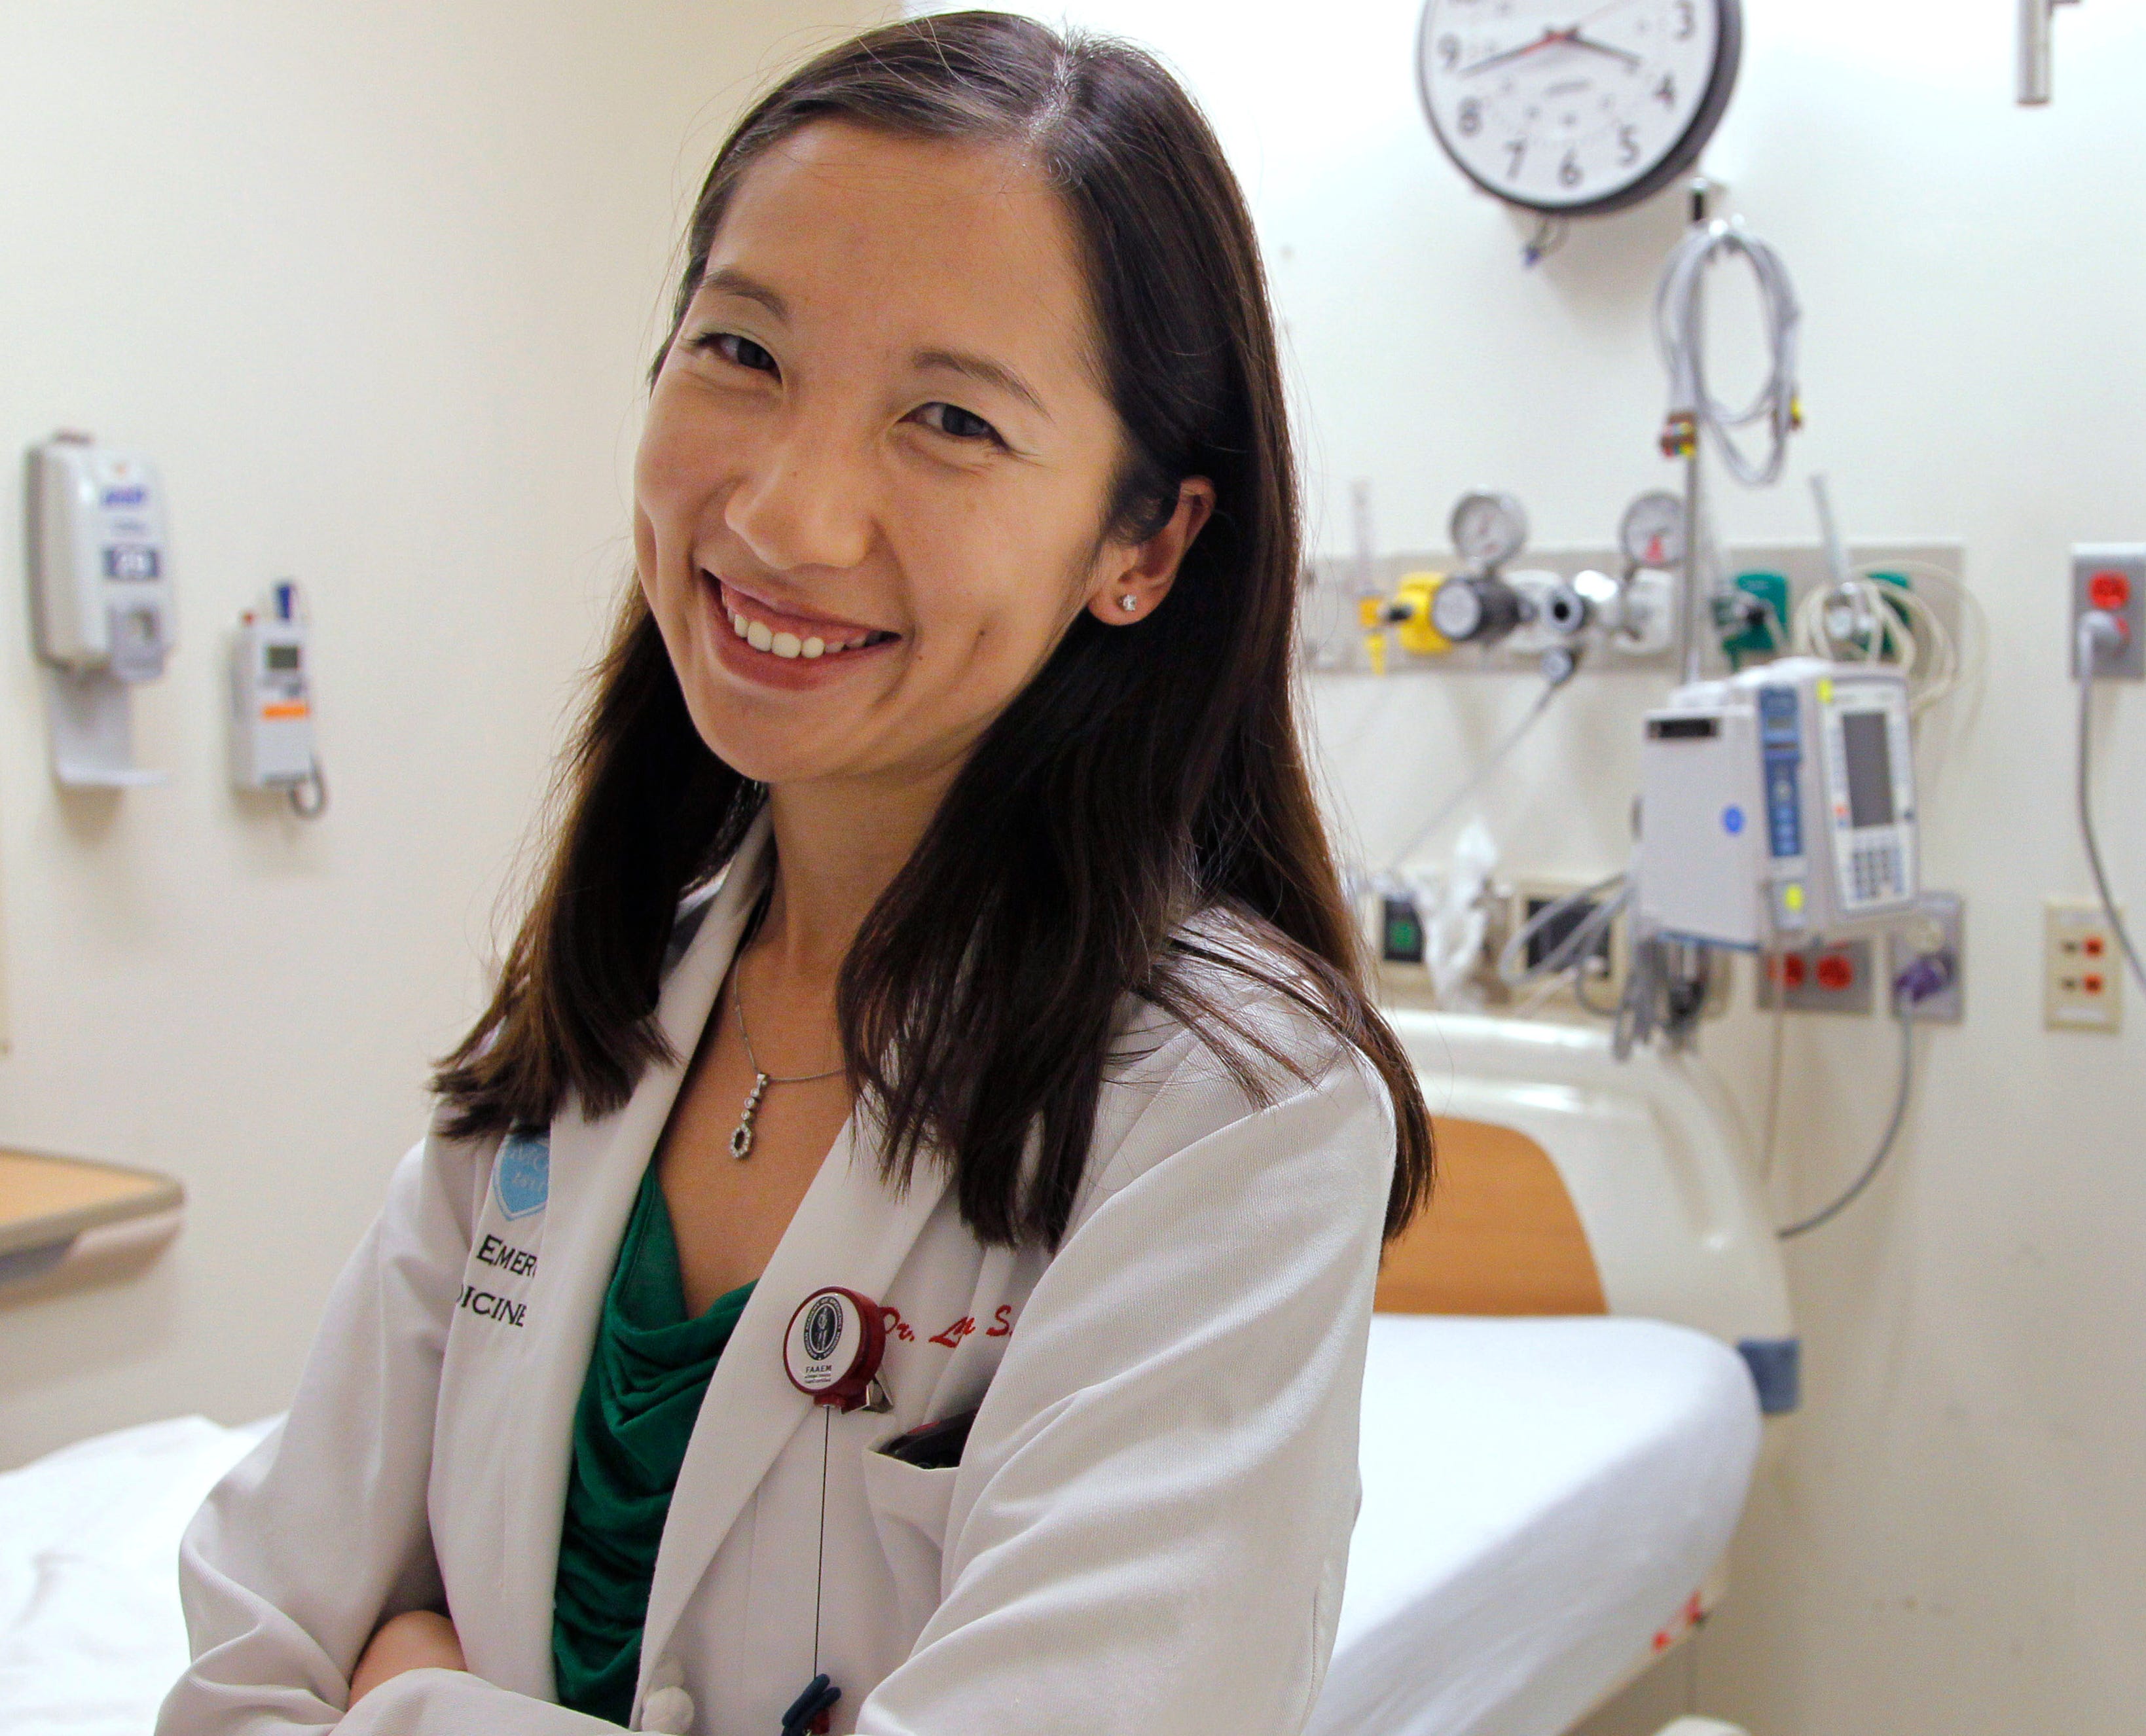 Planned Parenthood president Leana Wen is out after less than a year